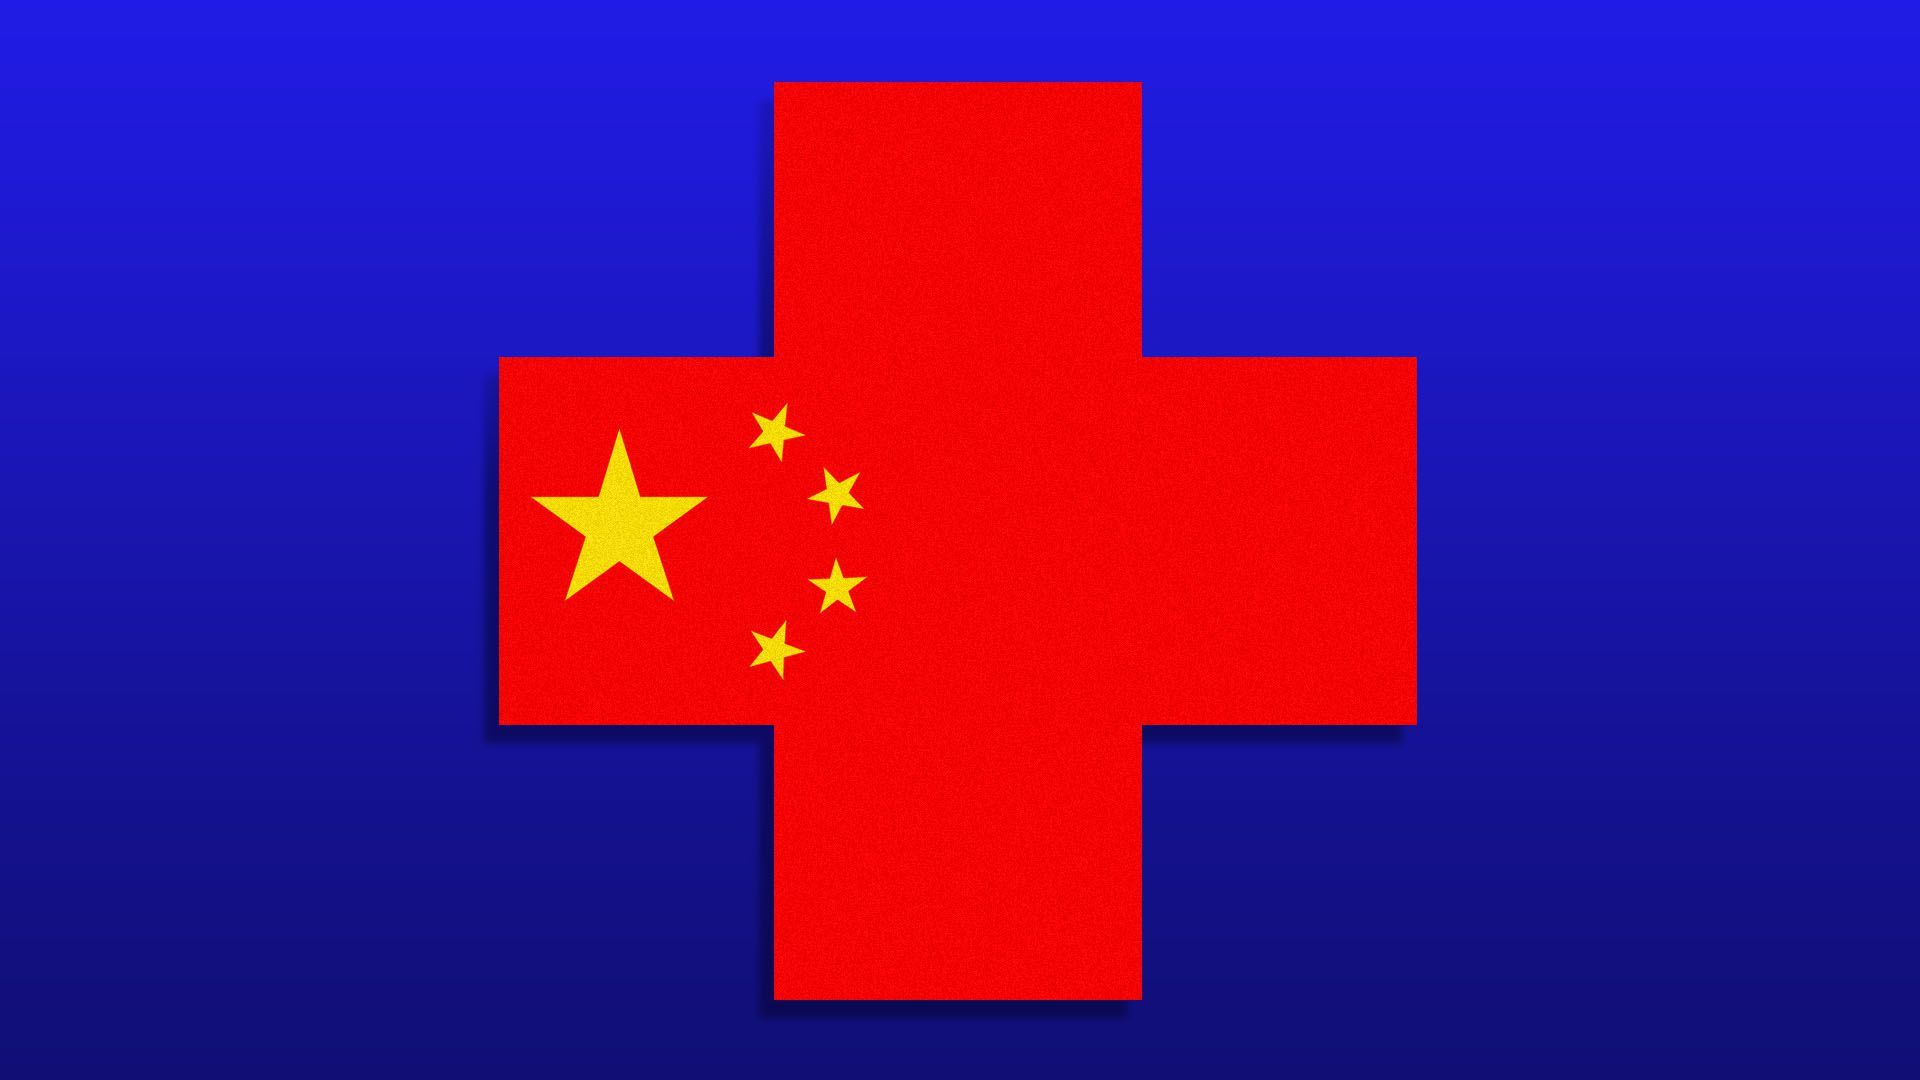 Illustration of the Chinese flag as a red cross